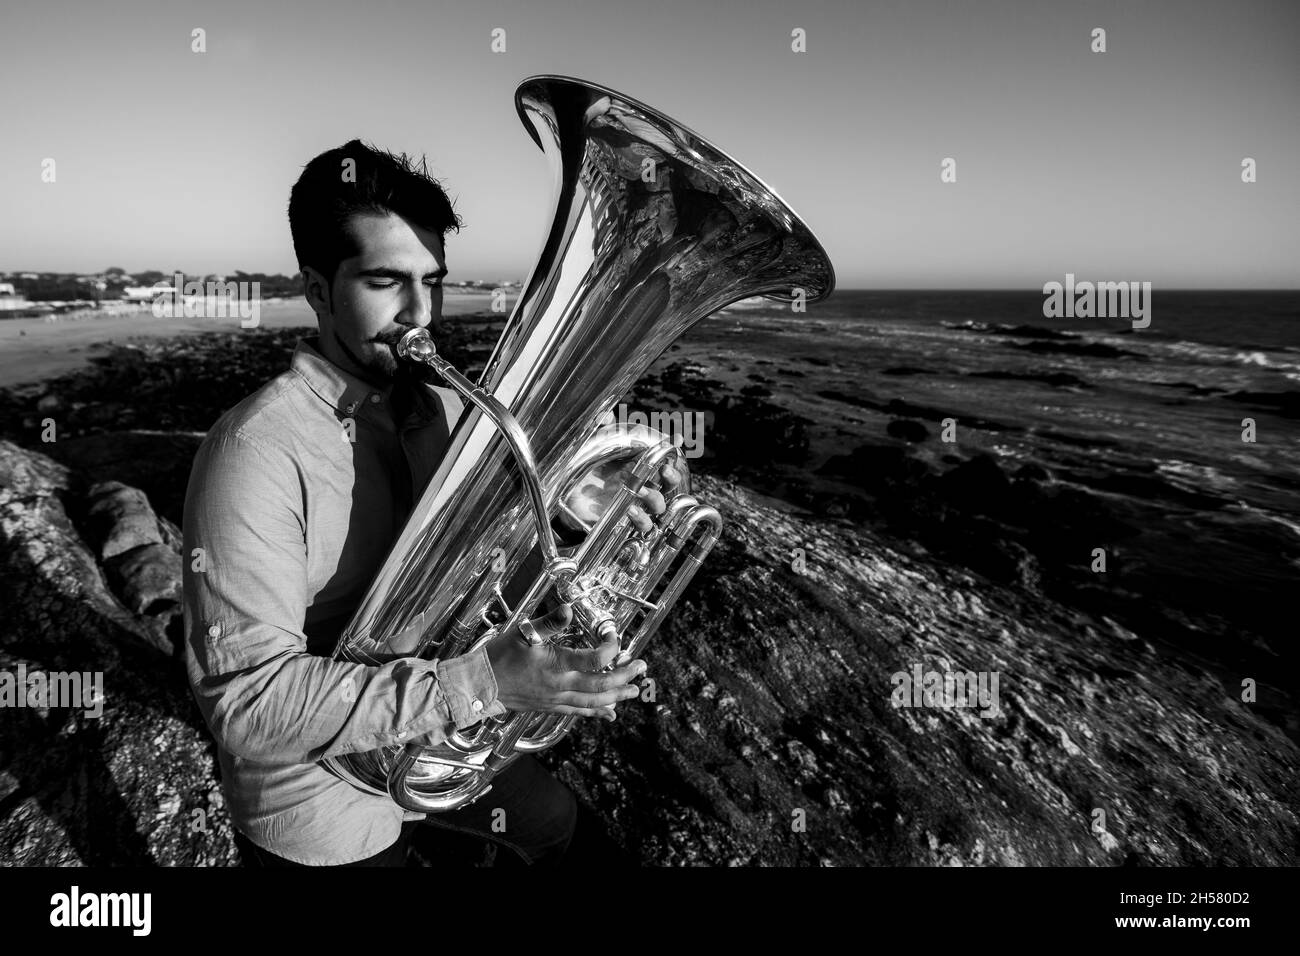 A musician with a tuba on the Ocean beach. Black and white photo. Stock Photo